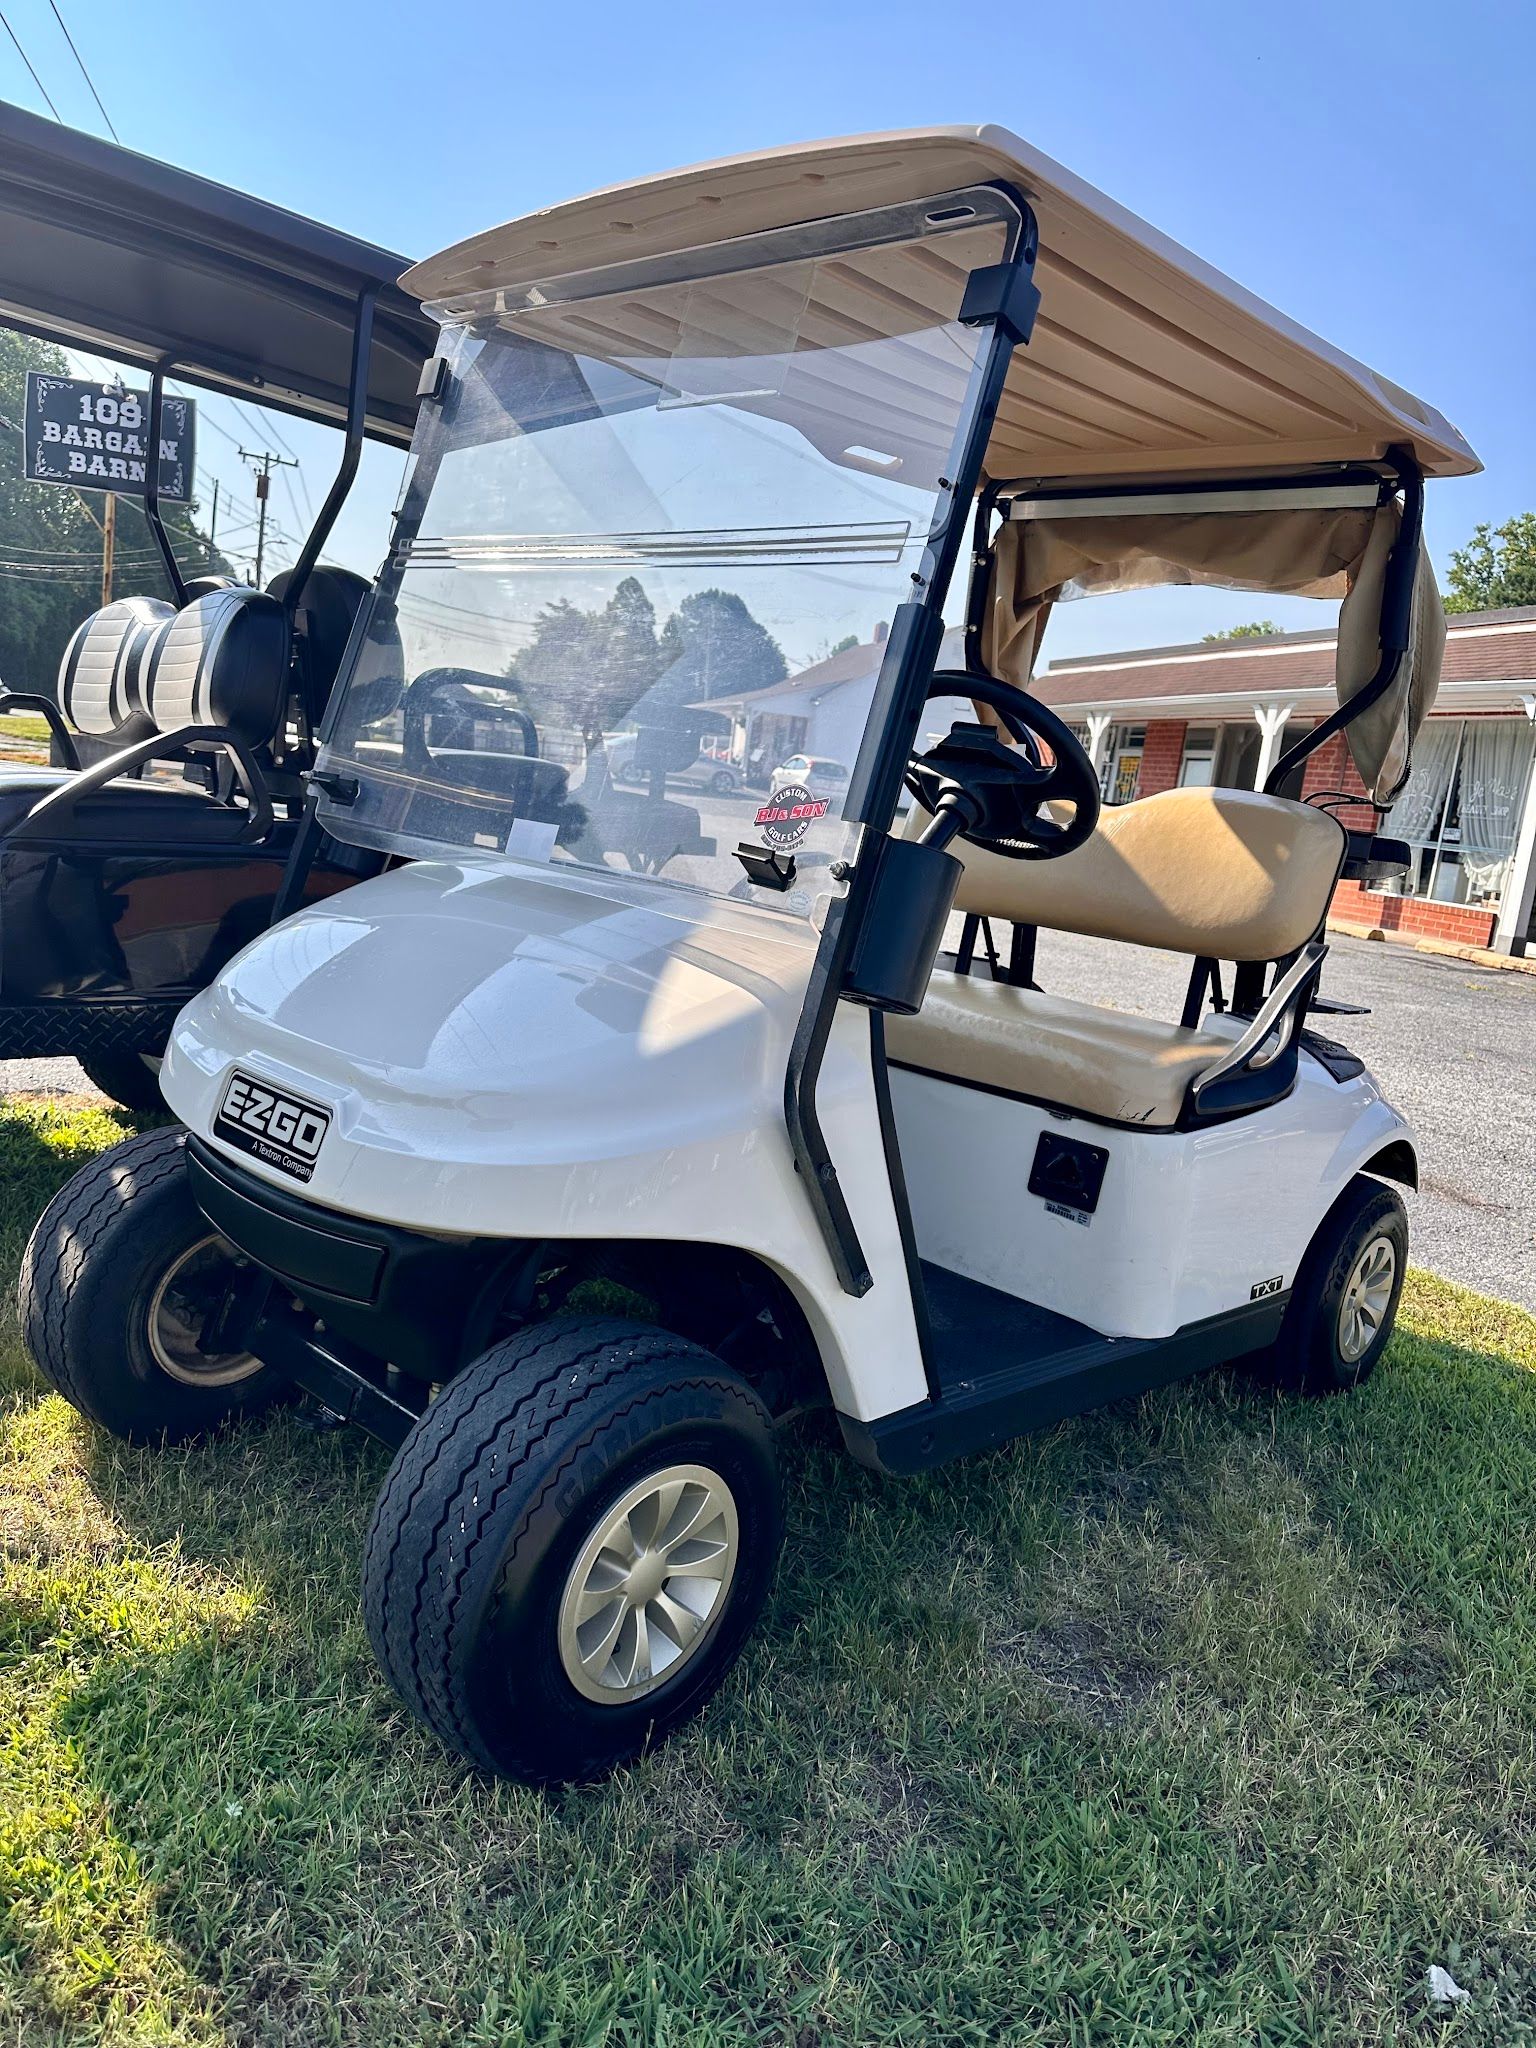 Services & Products B J & Son Golf Cart Sales and Service in Winston-Salem NC